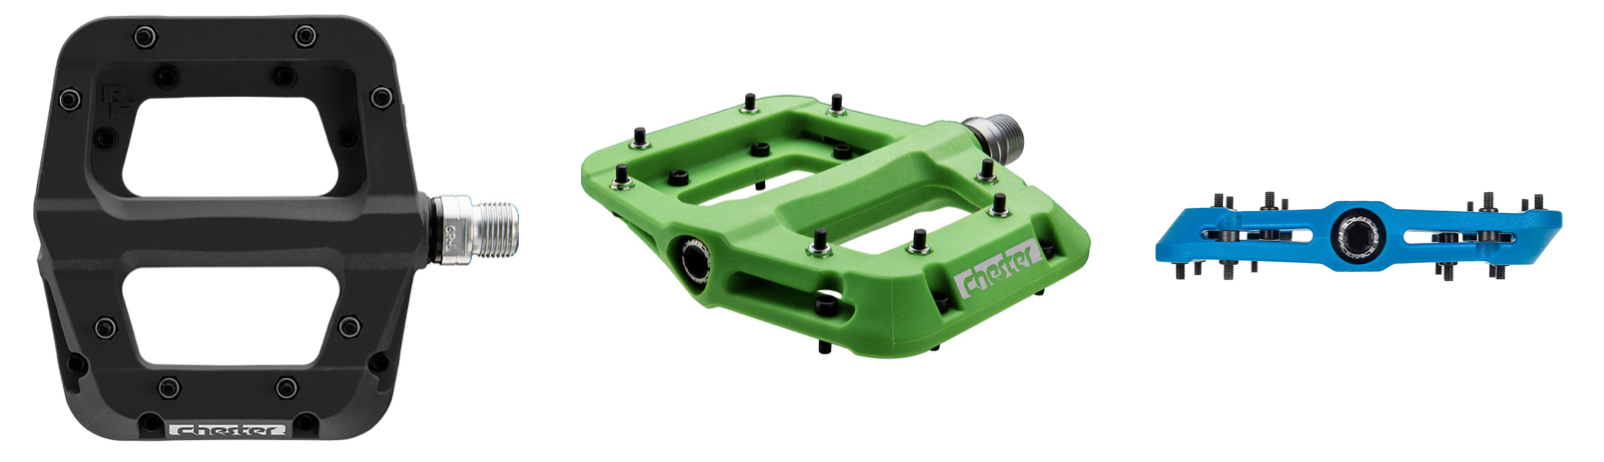 MTB Flat Pedals Buyer's Guide - Worldwide Cyclery